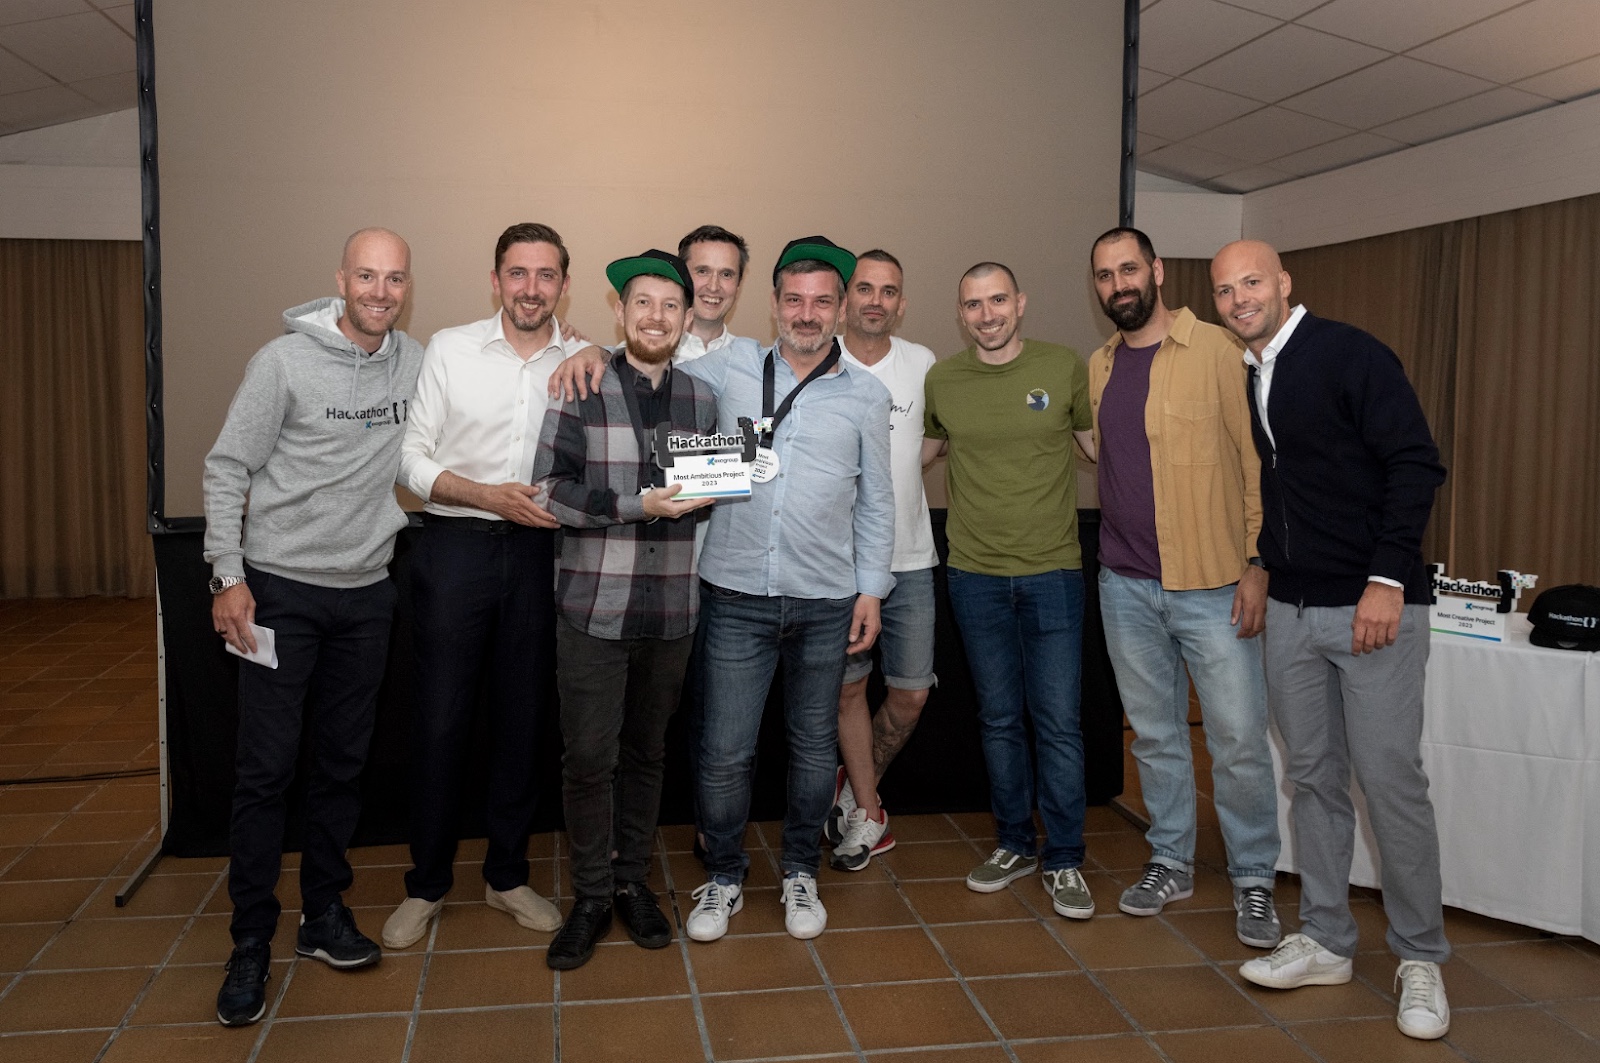 Winners of the ad tech Hackathon: senior php developer jobs in barcelona - find out what is an ad tech hackathon in the best ad tech companies to work for in porto